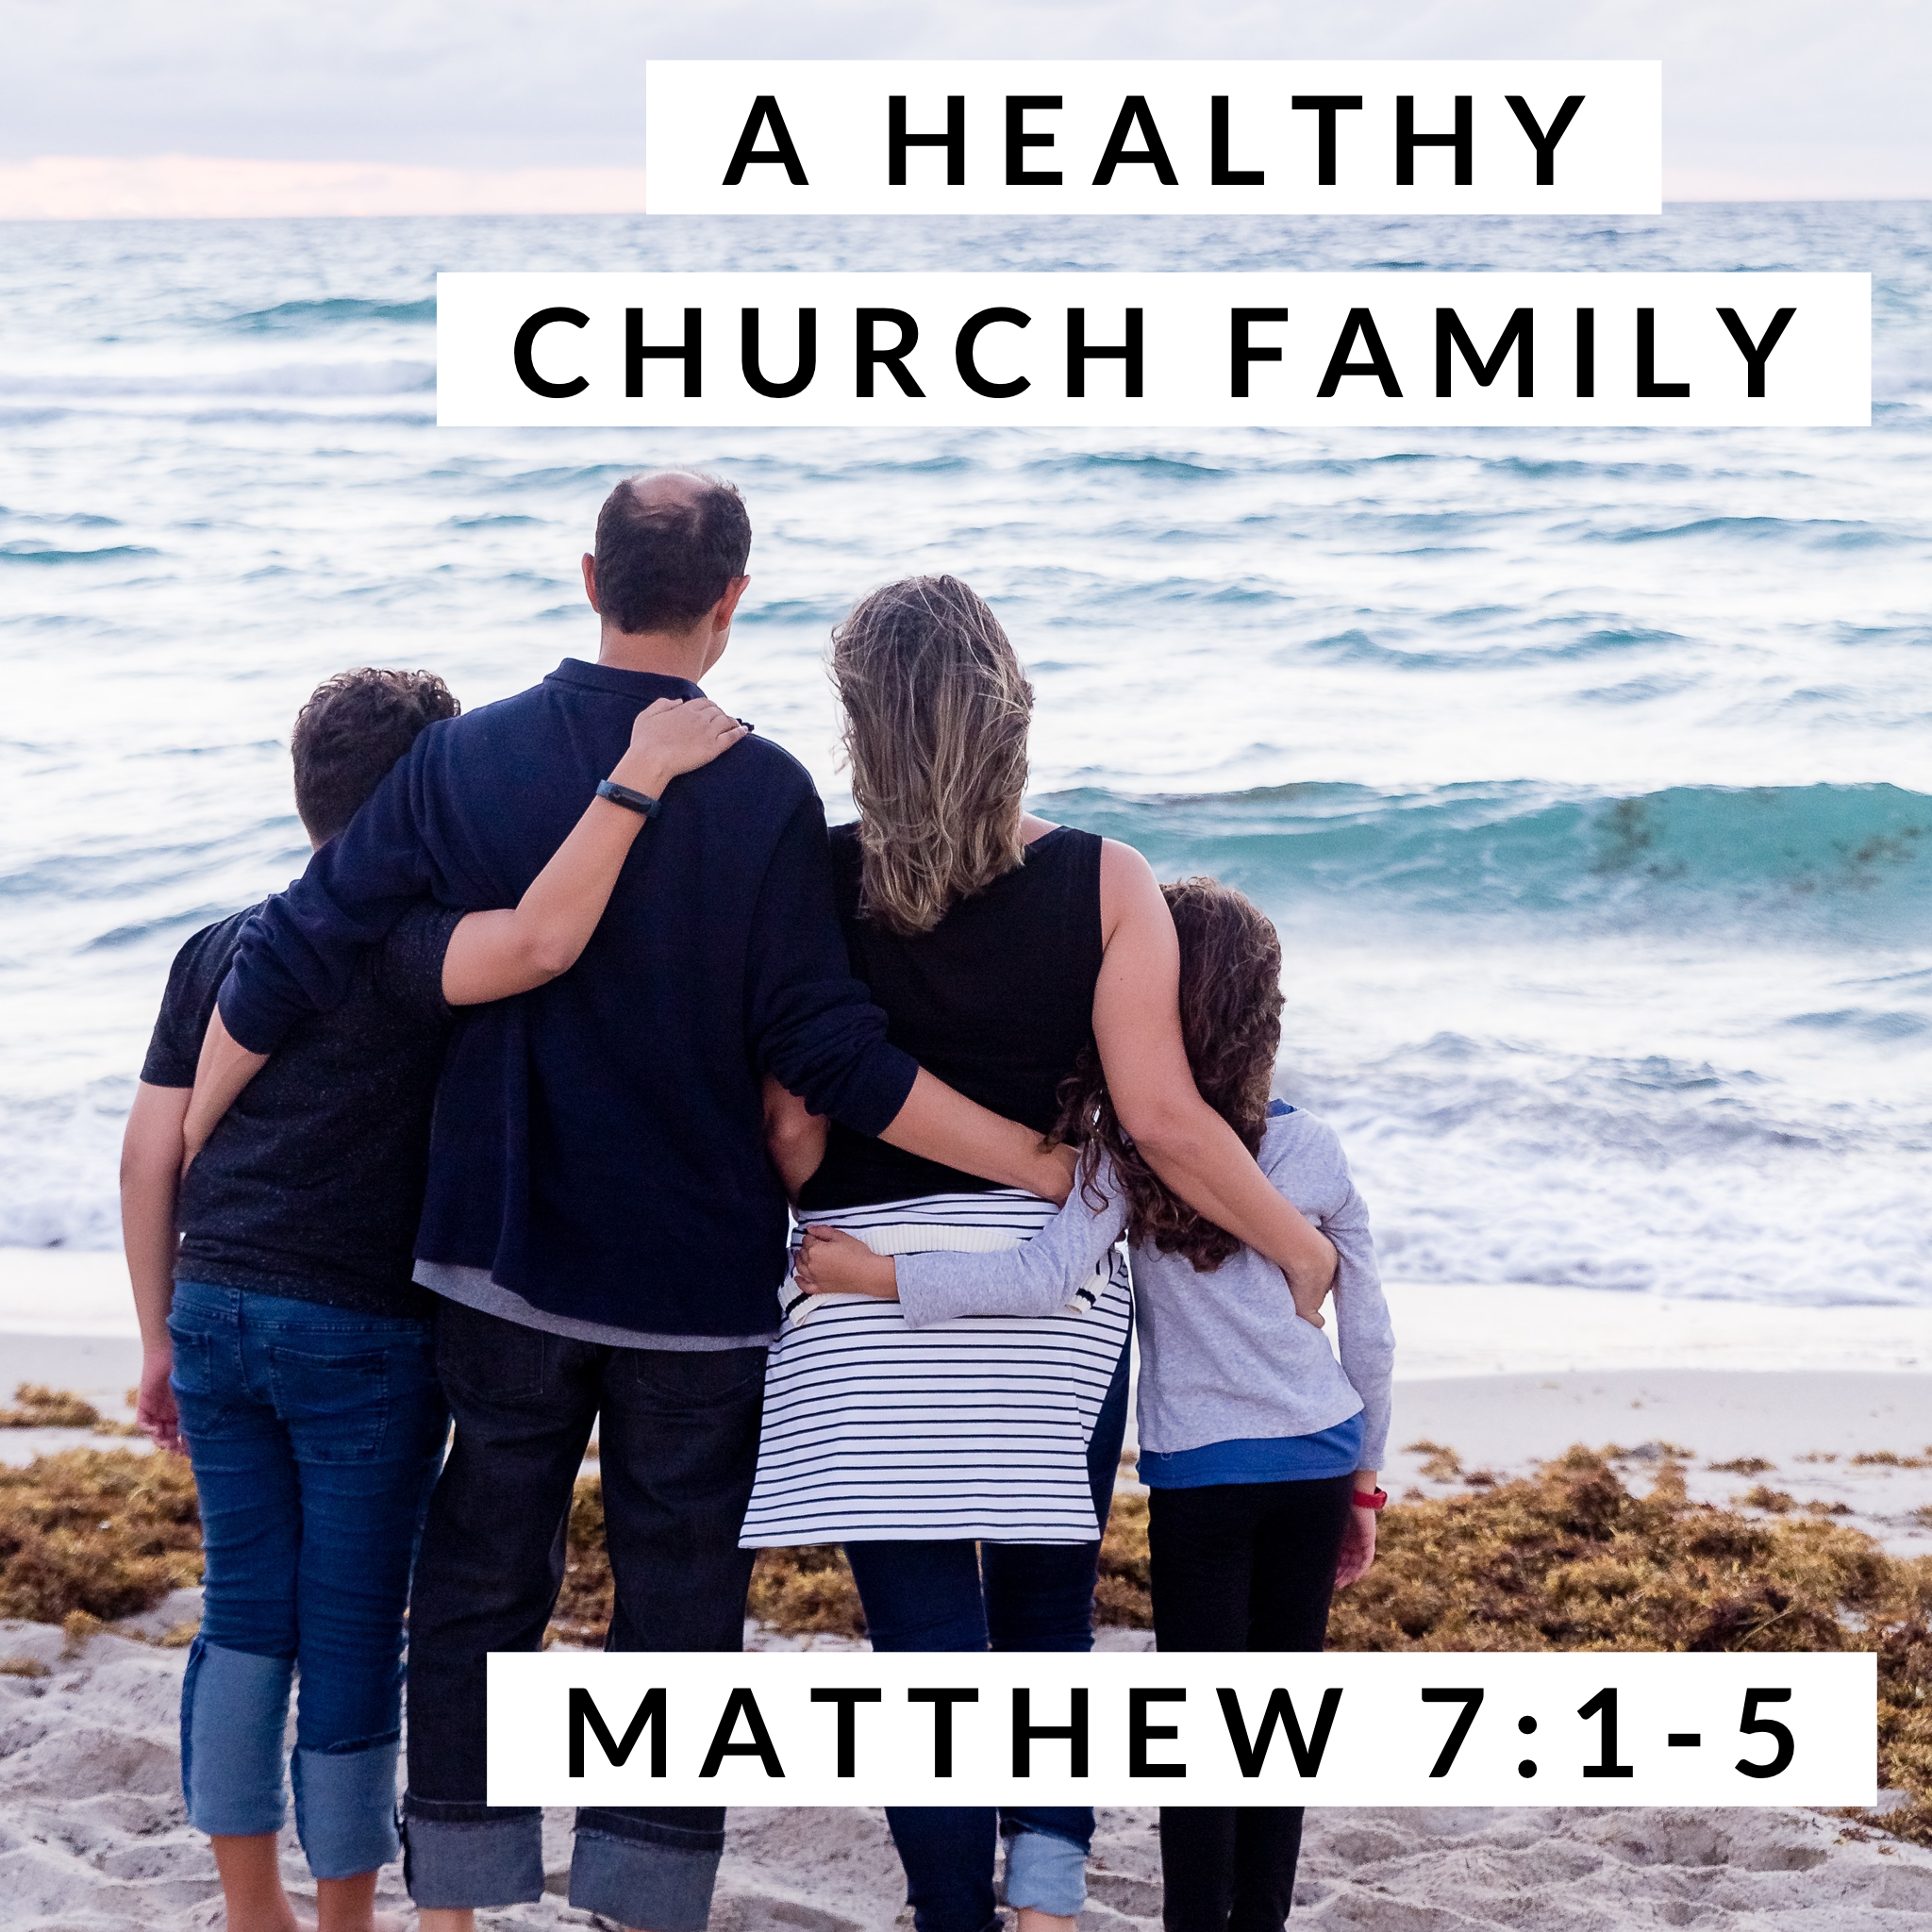 I Will Lead My Family to be Healthy Church Members